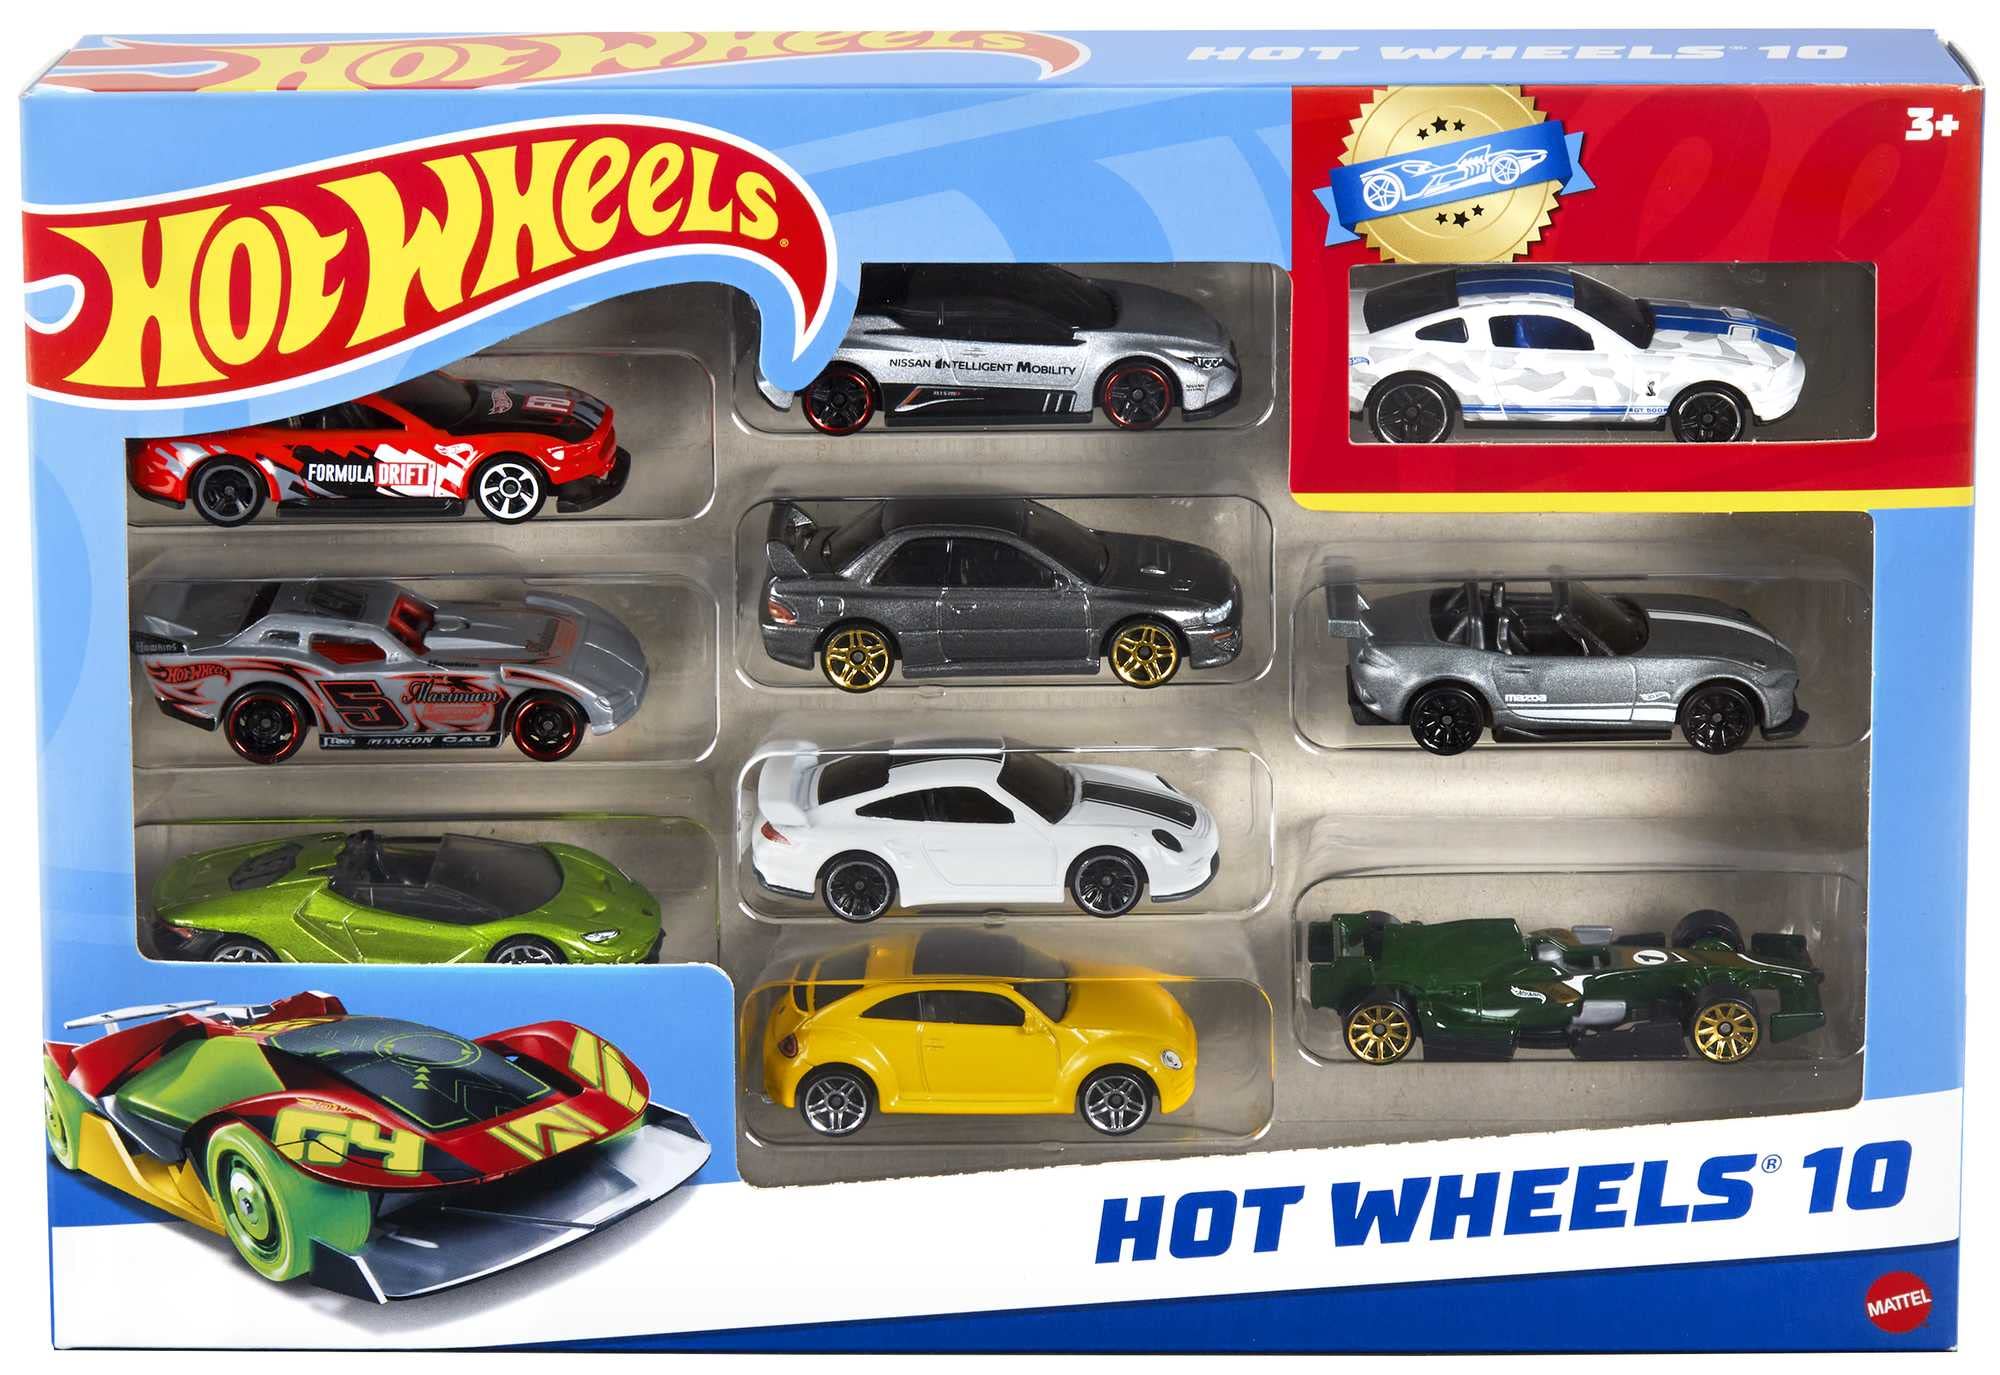 Hot Wheels Set of 10 Toy Cars & Trucks in 1:64 Scale, Race Cars, Semi, Rescue or Construction Trucks (Styles May Vary) [Amazon Exclusive]